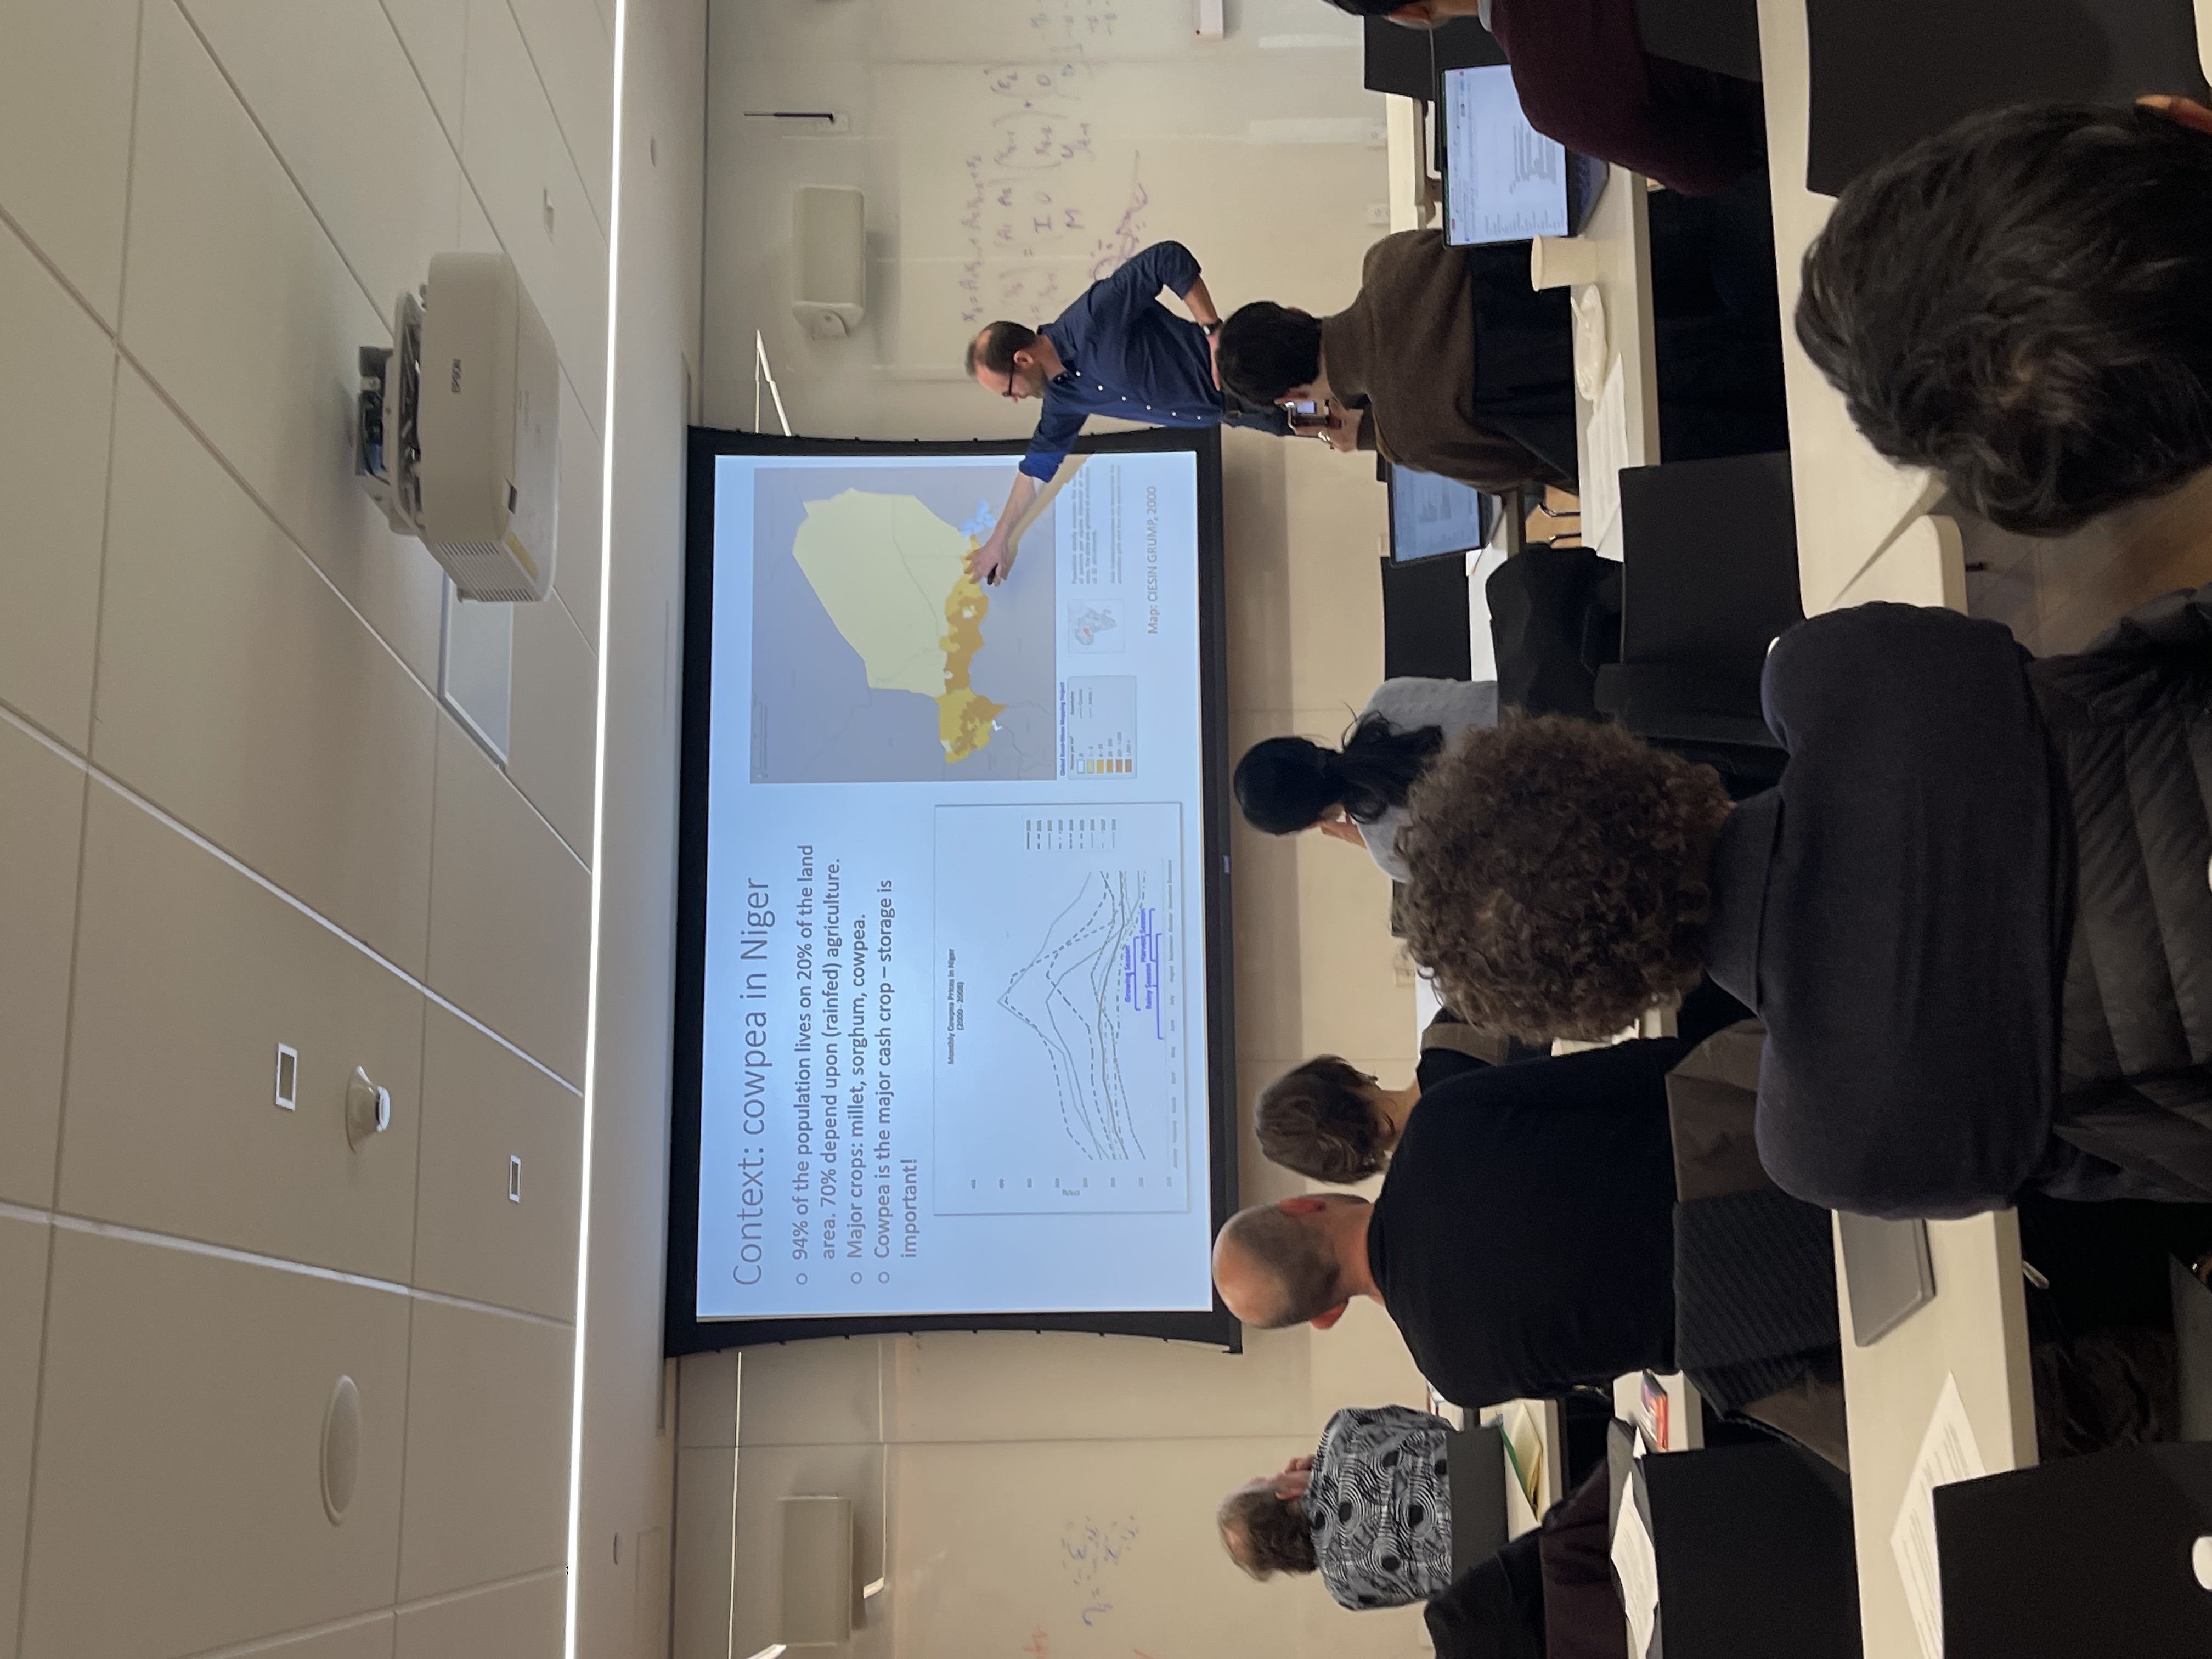 "Dillon presenting on harvest storage and food loss in sub-Saharan Africa"